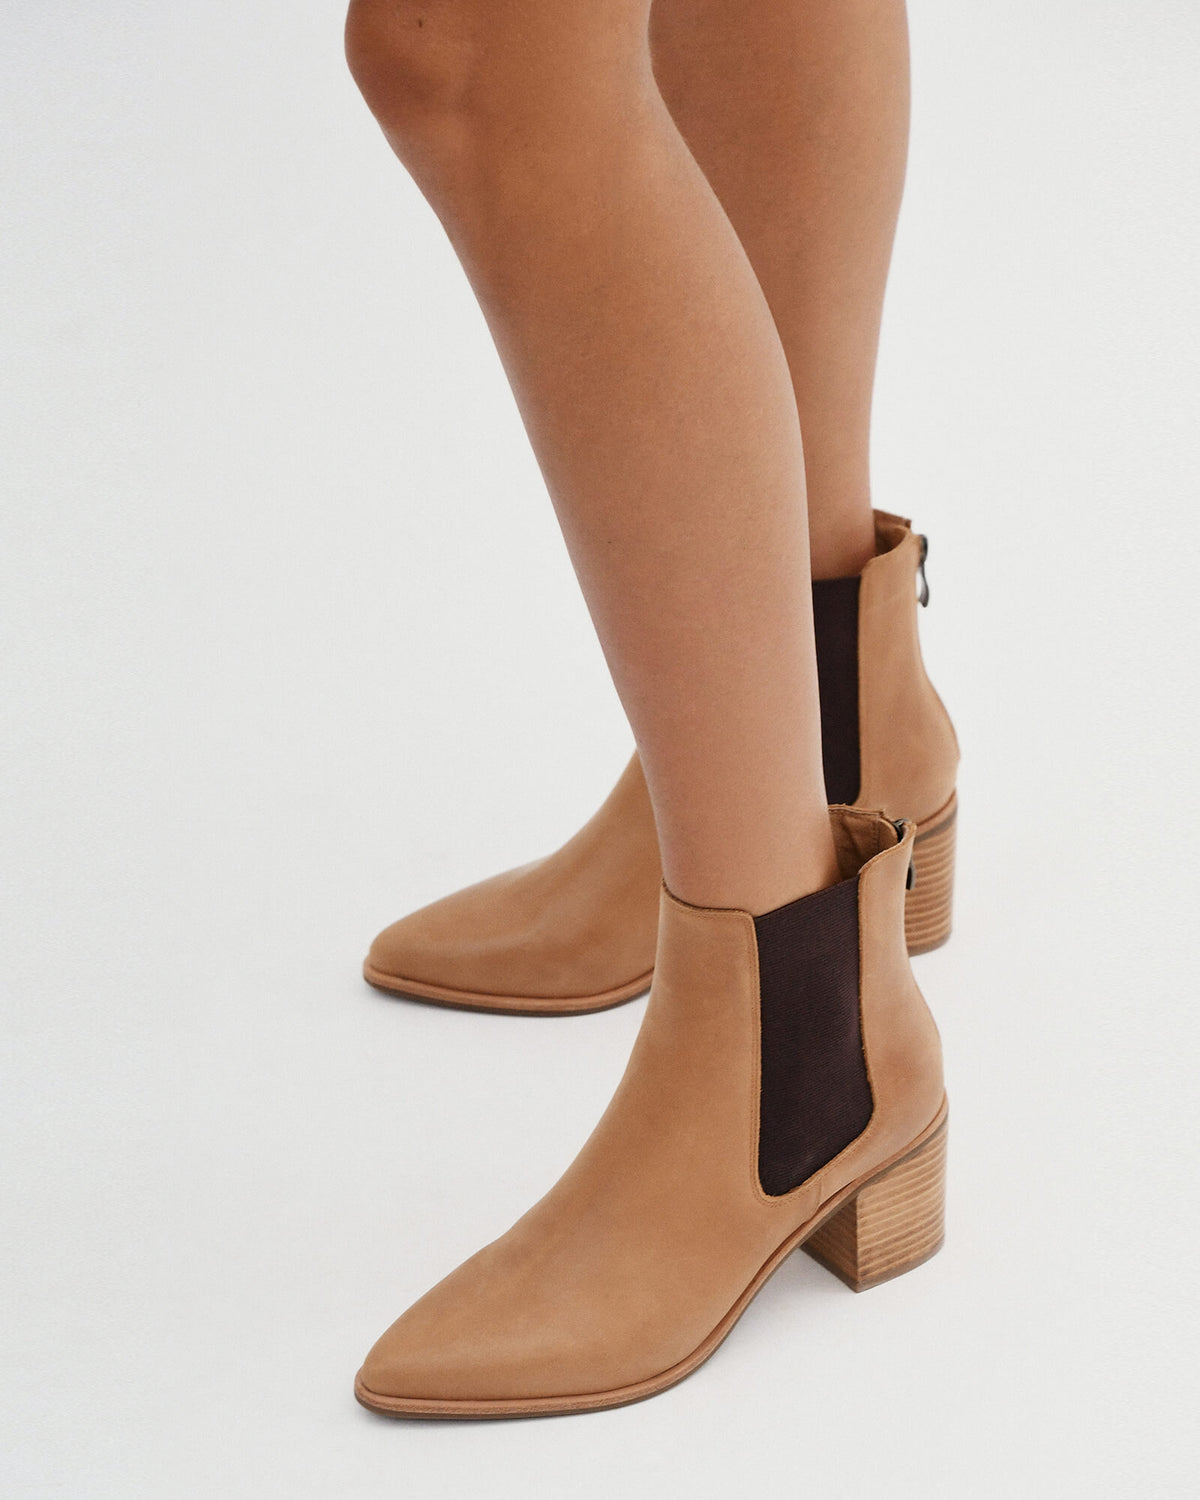 ALLURE MID ANKLE BOOTS CHOCOLATE LEATHER